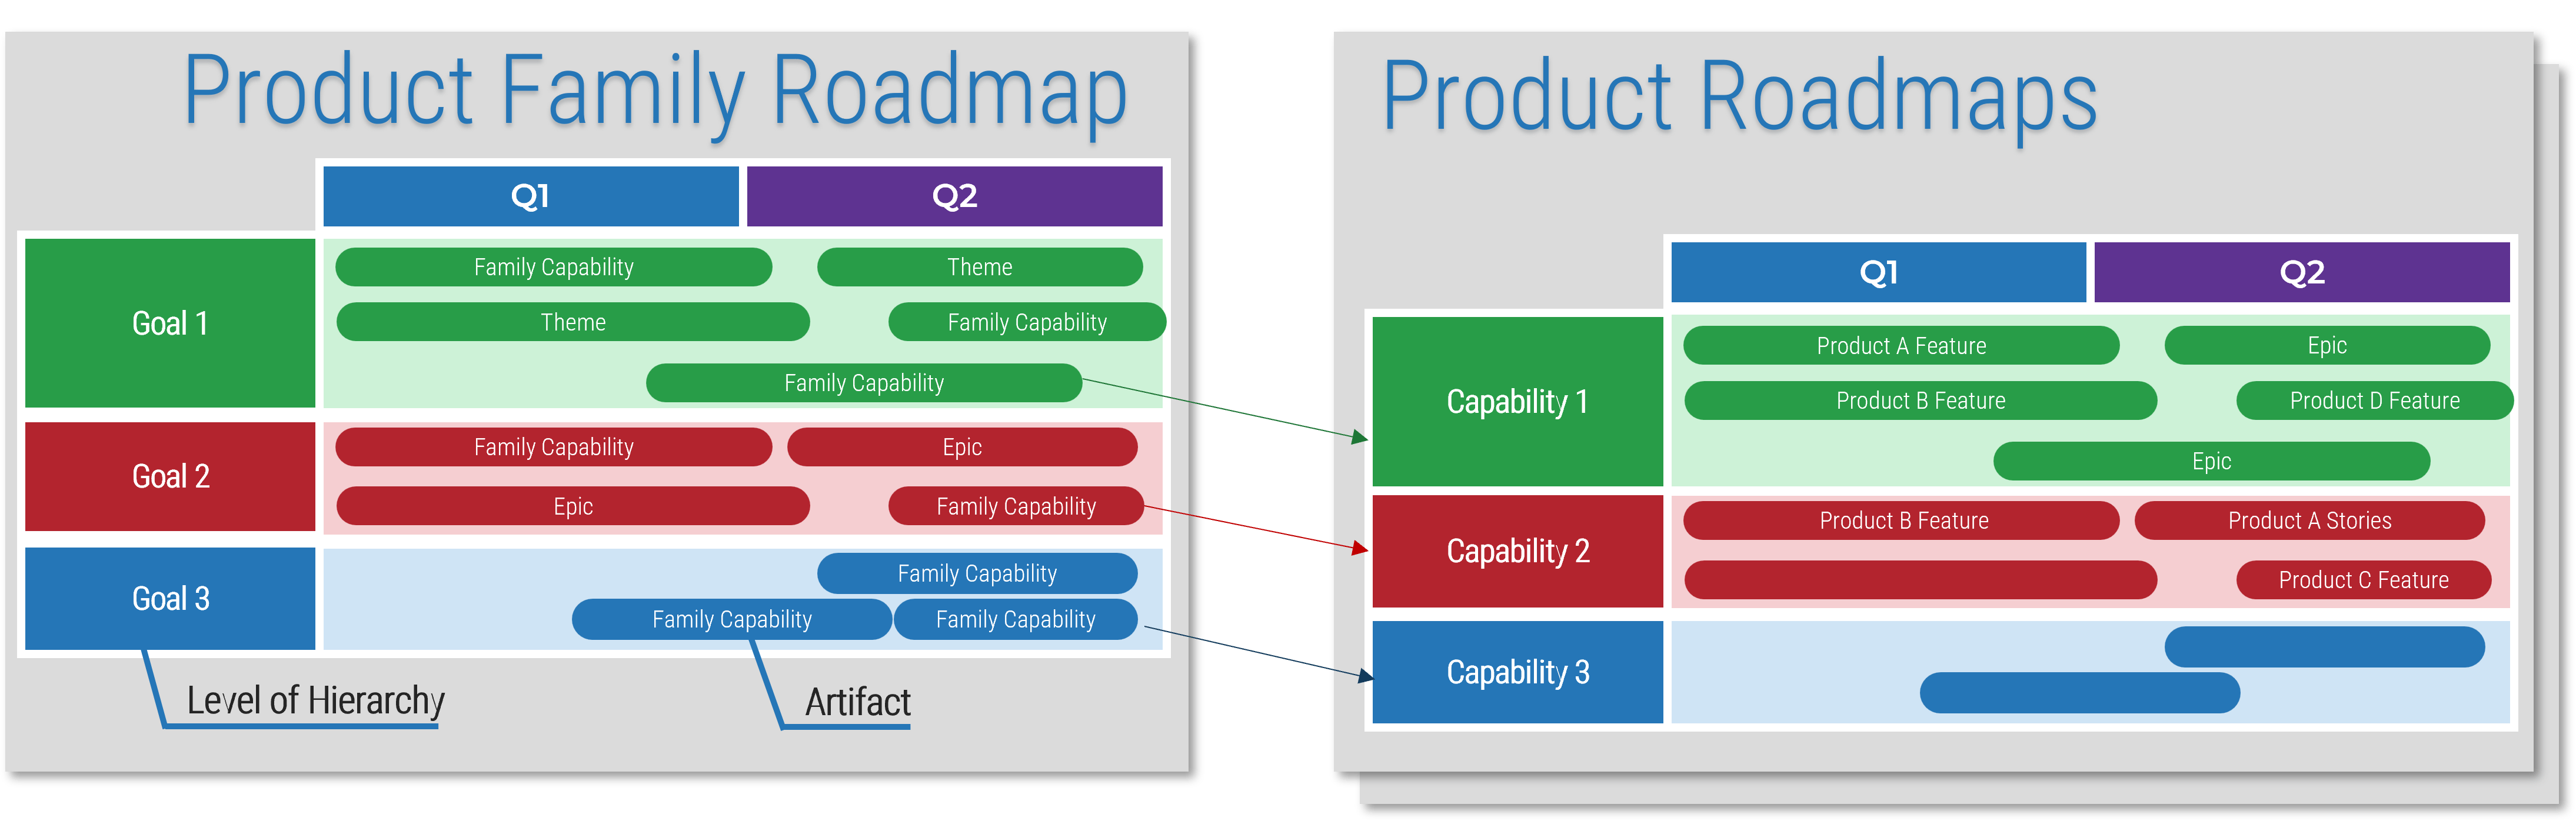 A comparison between product family roadmaps and product roadmaps.